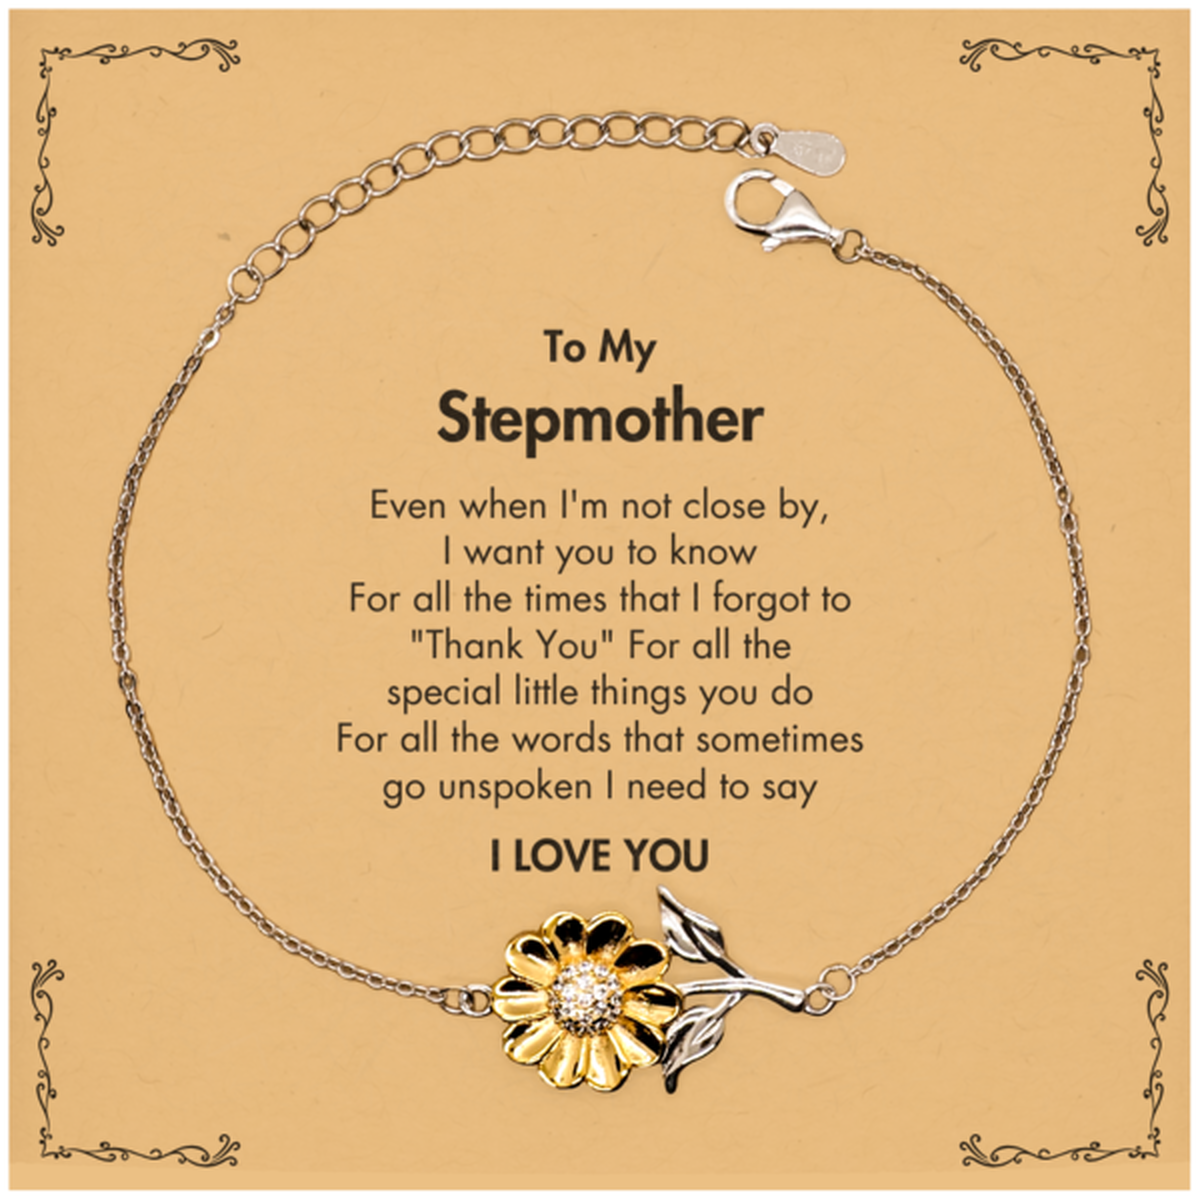 Thank You Gifts for Stepmother, Keepsake Sunflower Bracelet Gifts for Stepmother Birthday Mother's day Father's Day Stepmother For all the words That sometimes go unspoken I need to say I LOVE YOU